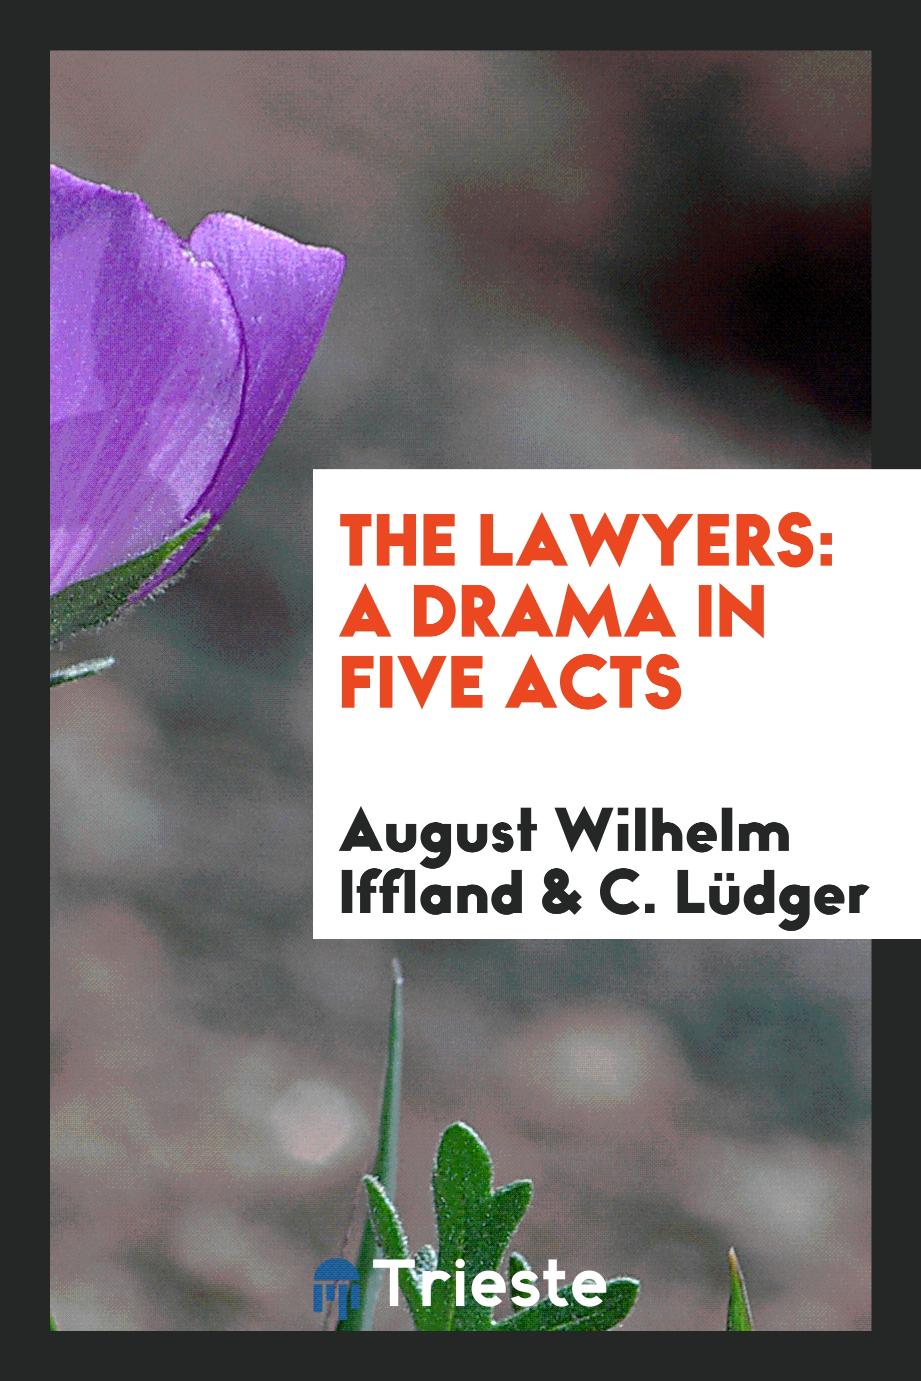 The Lawyers: A Drama in Five Acts